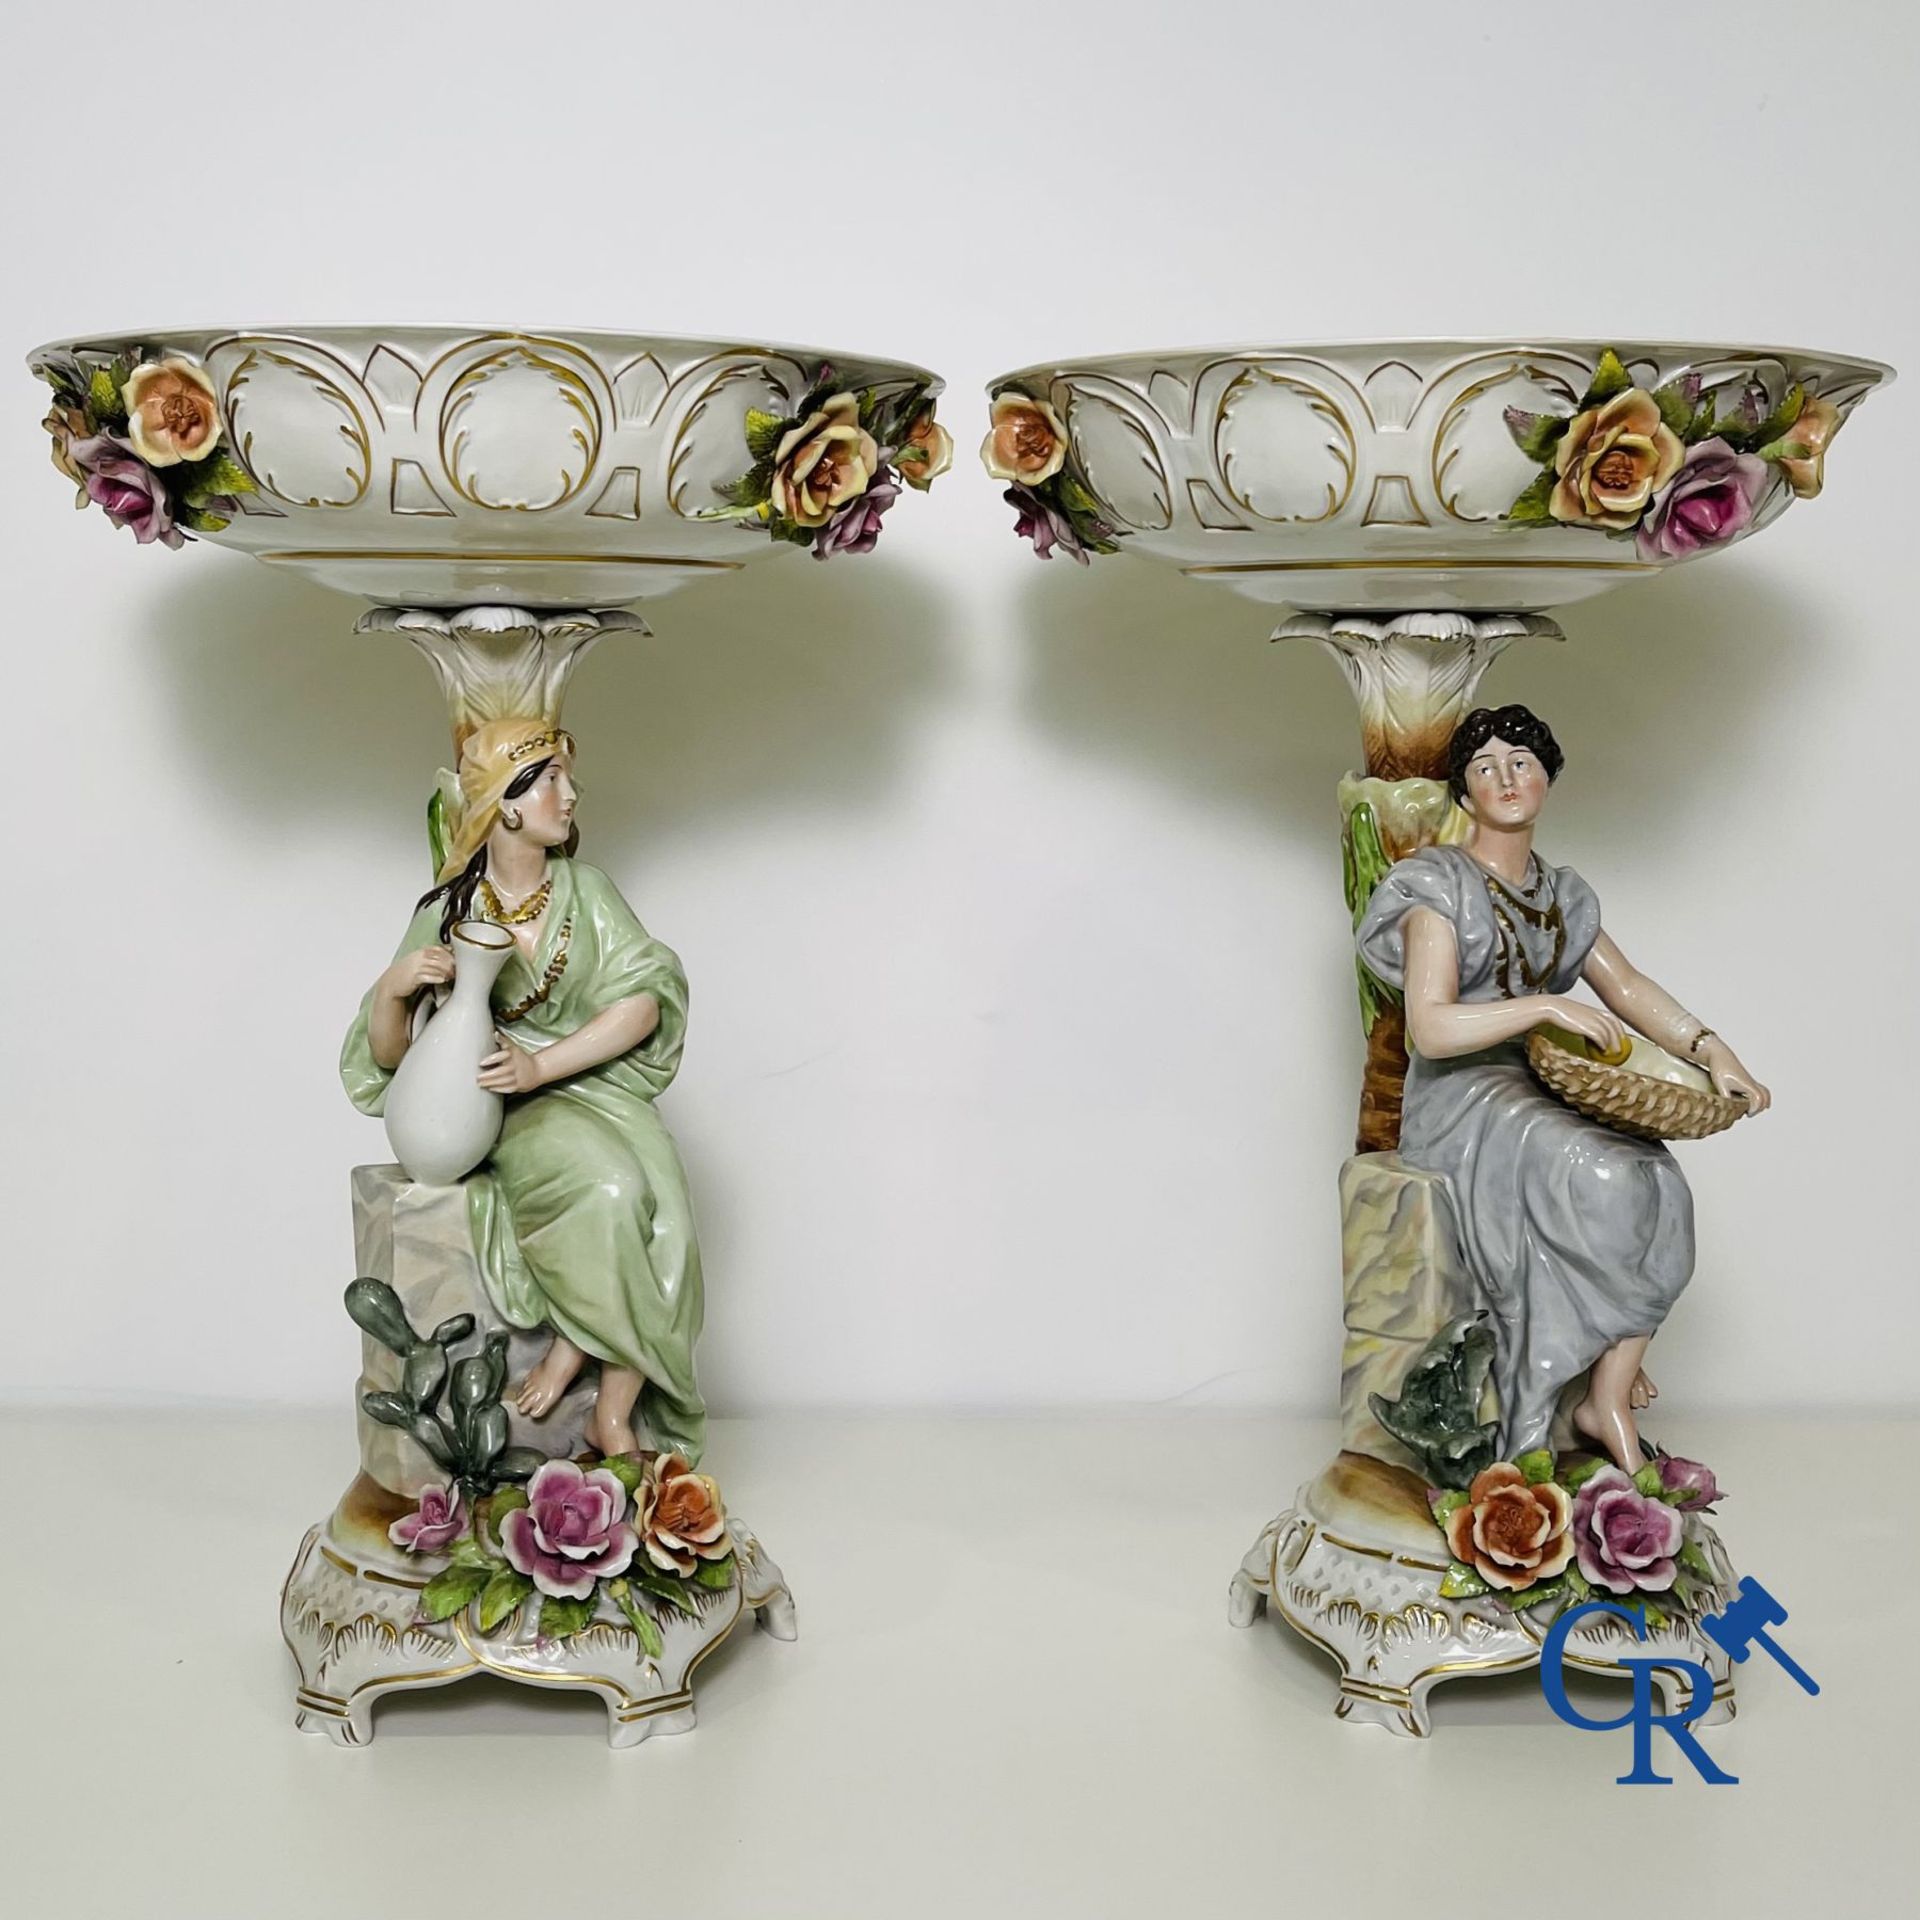 A pair of table centrepieces in German polychrome porcelain.